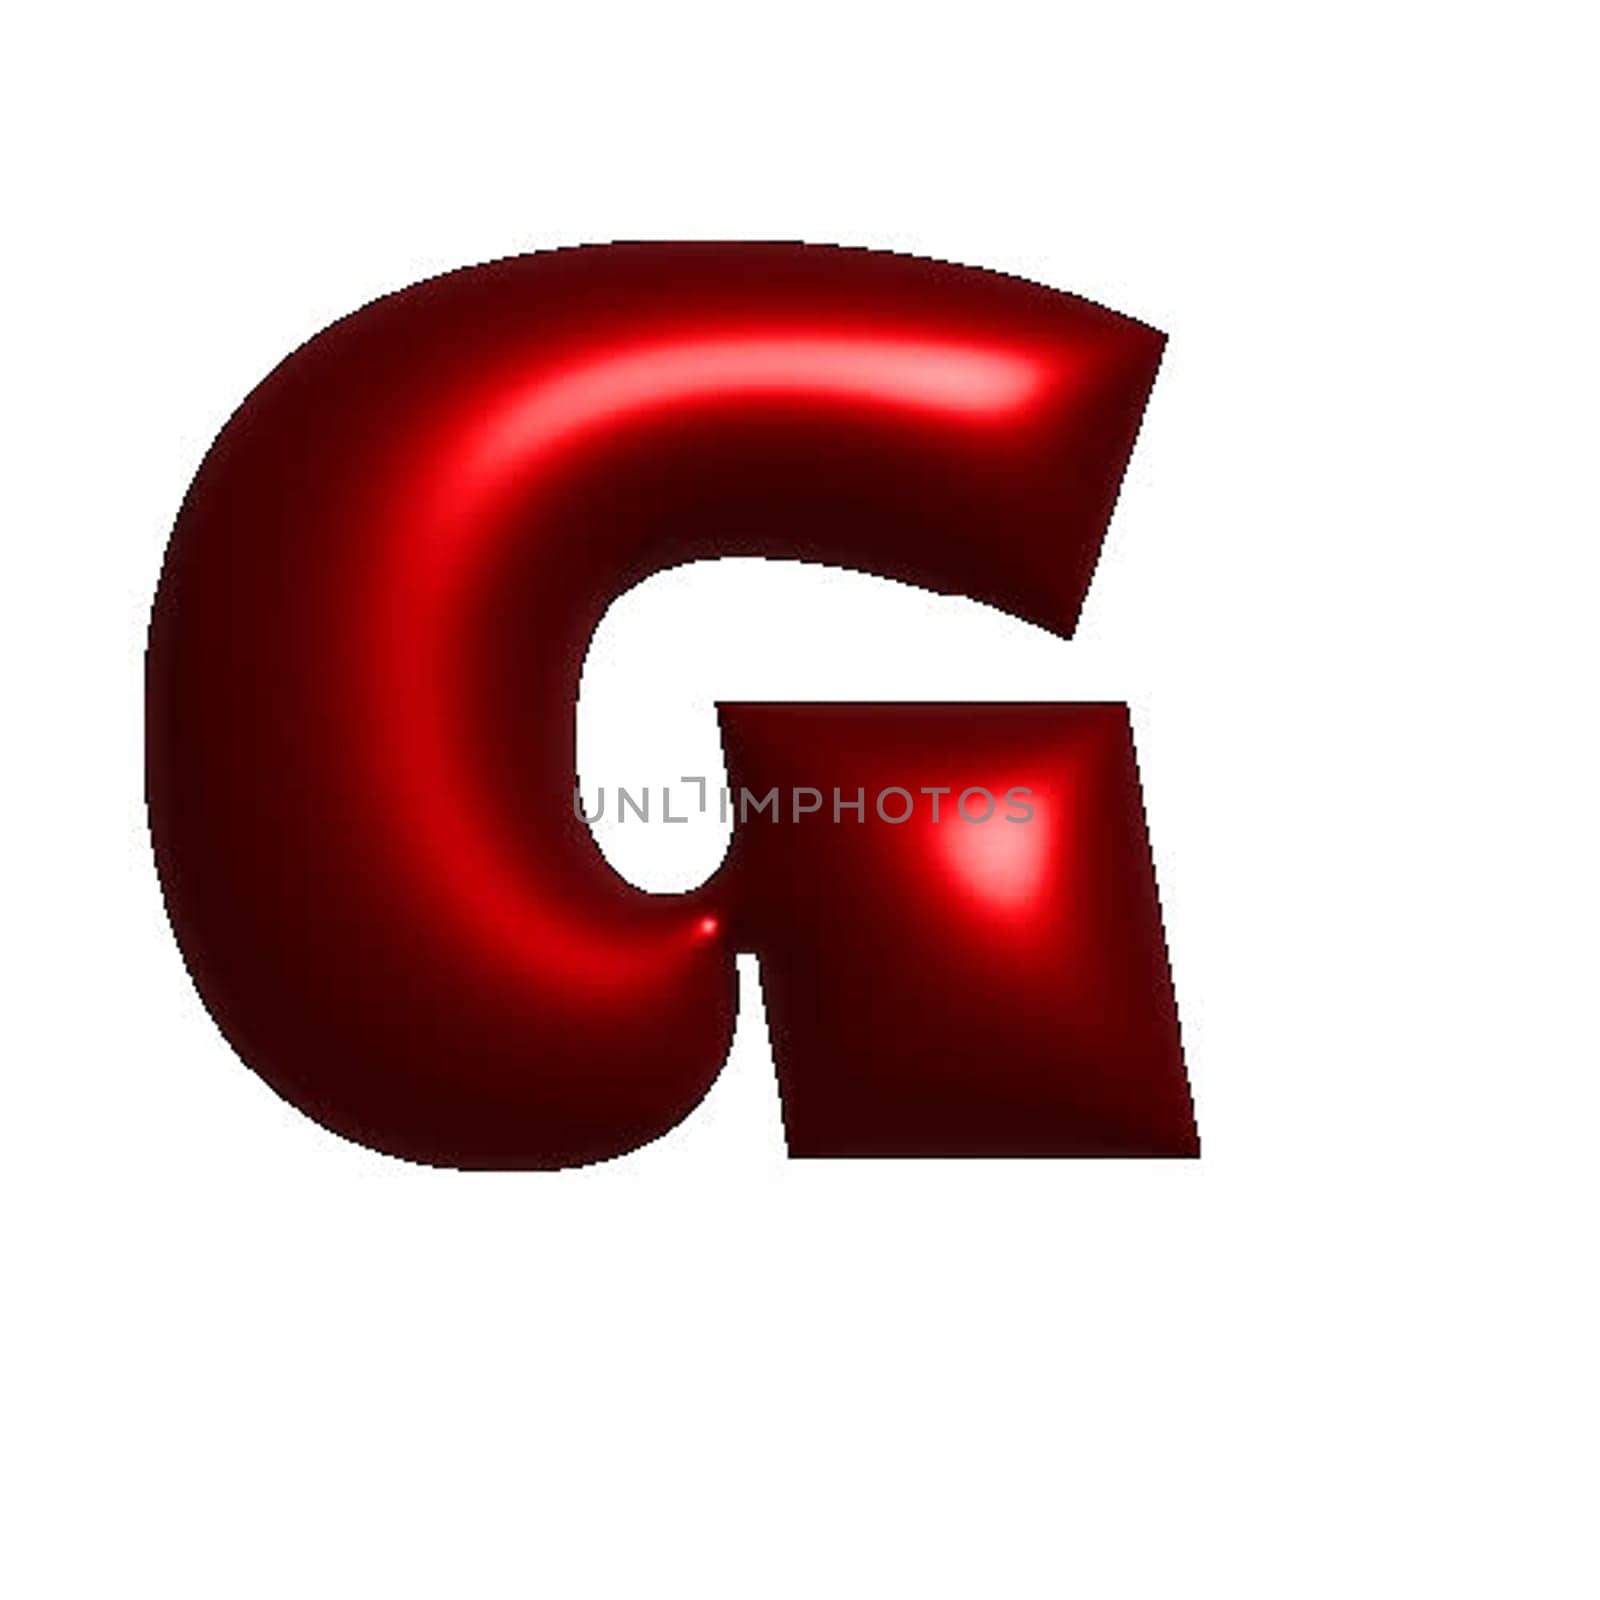 Red metal shiny reflective letter G 3D illustration by Dustick